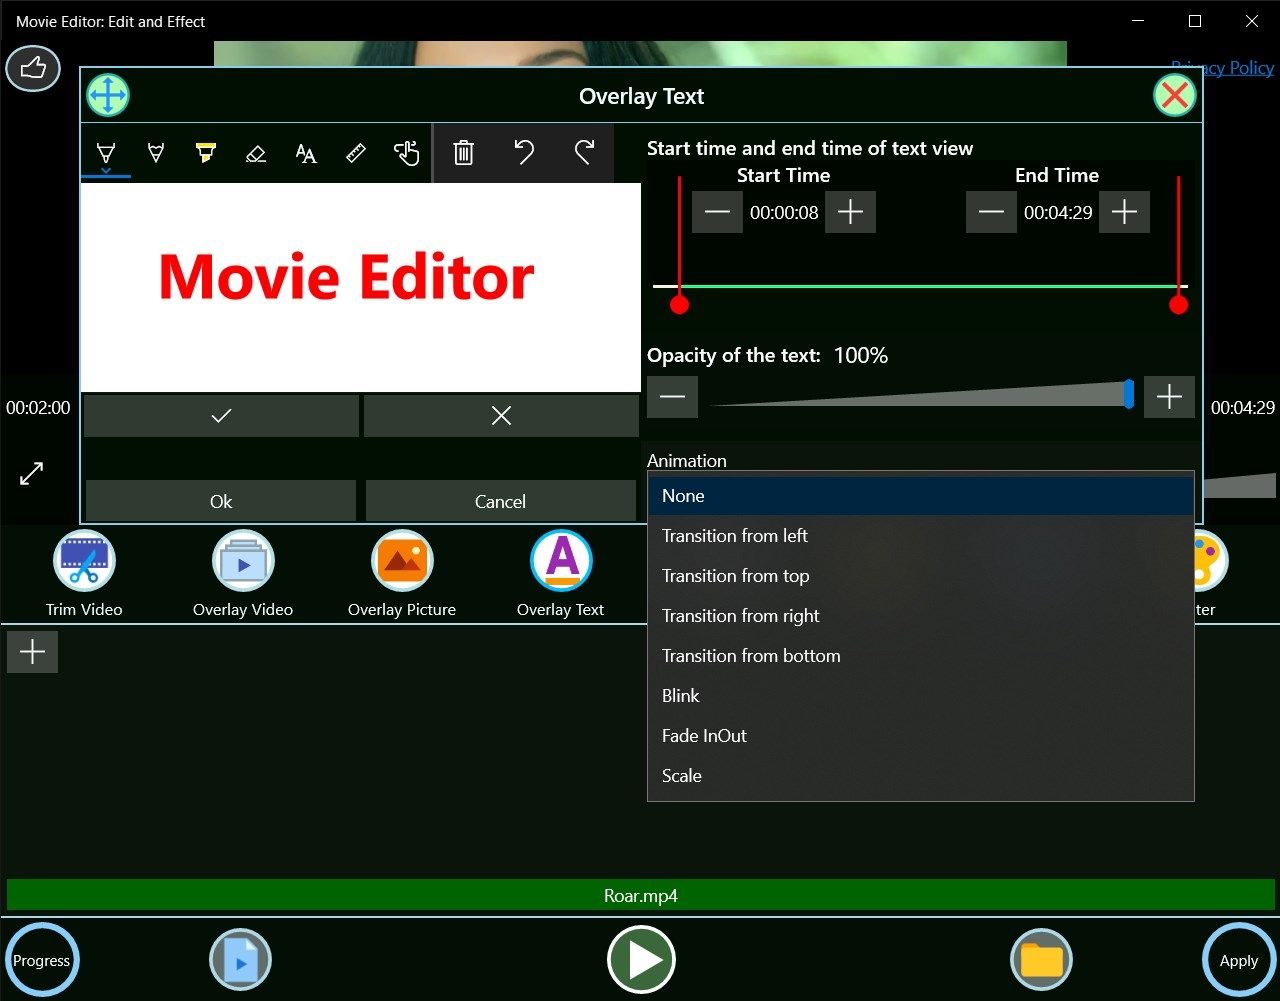 Movie Editor: Edit and Effect